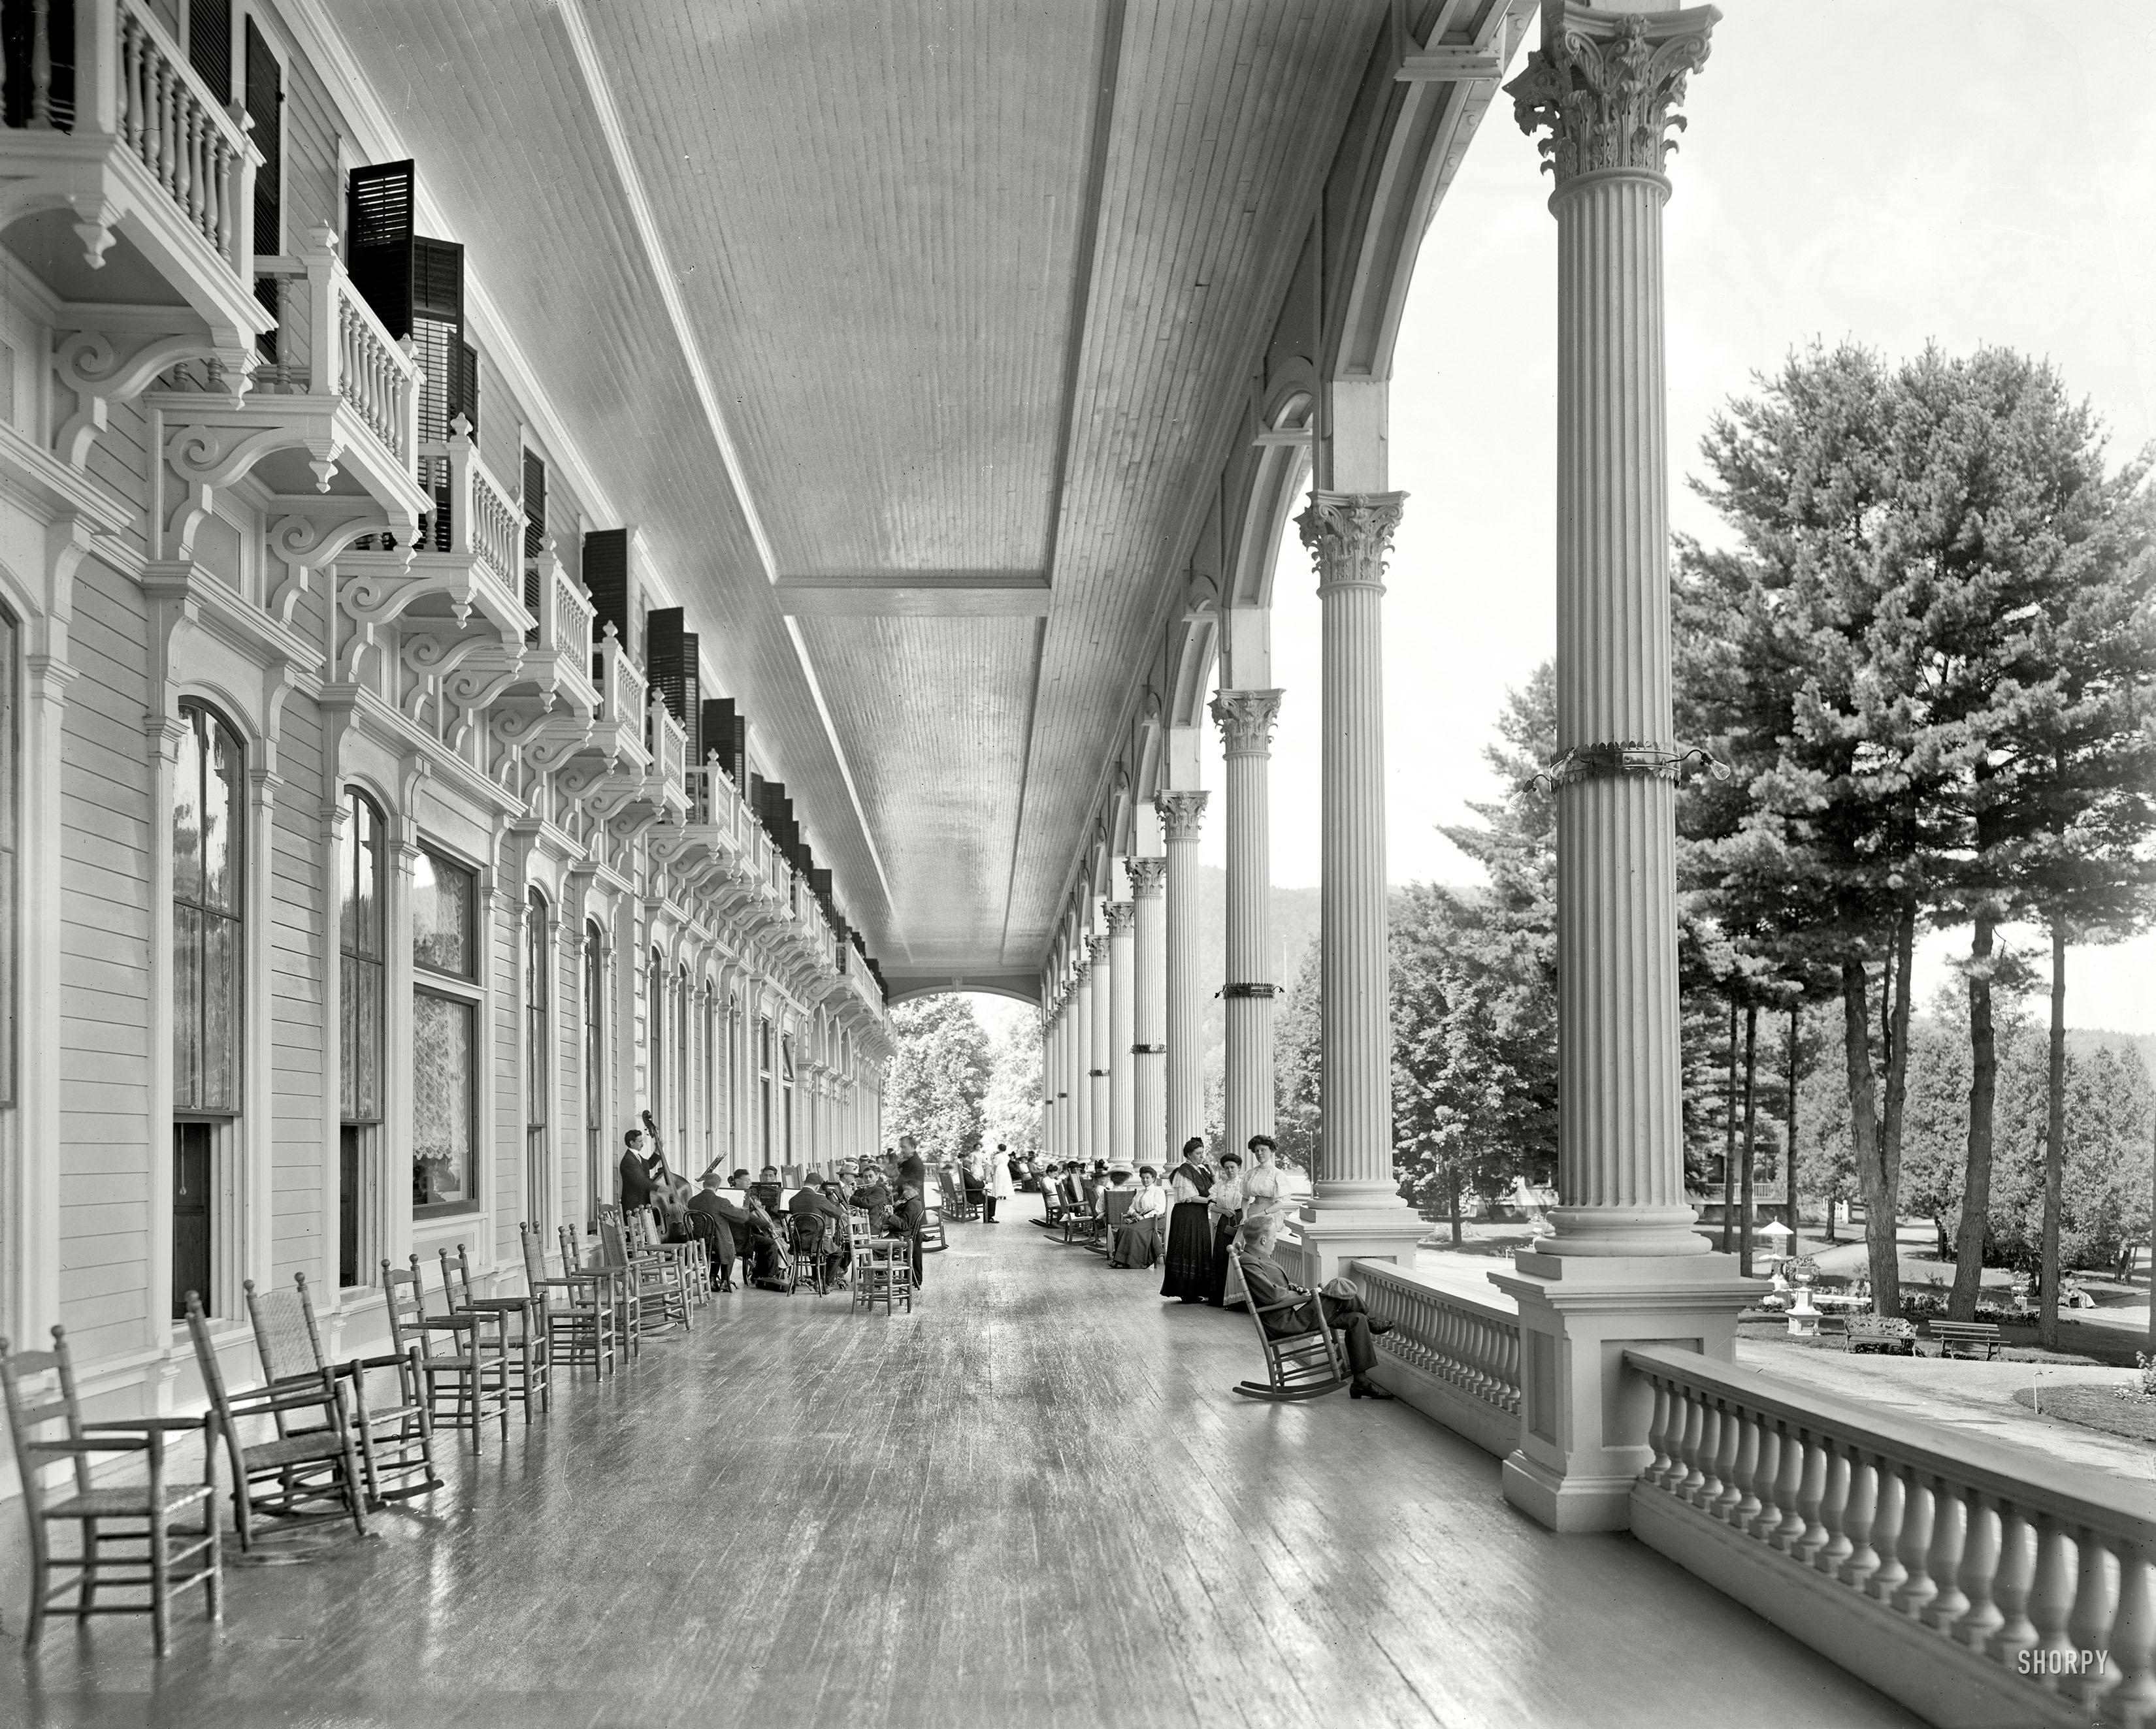 Lake George, New York, circa 1908. "Grand piazza, Fort William Henry Hotel." 8x10 inch dry plate glass negative, Detroit Publishing Company. View full size.